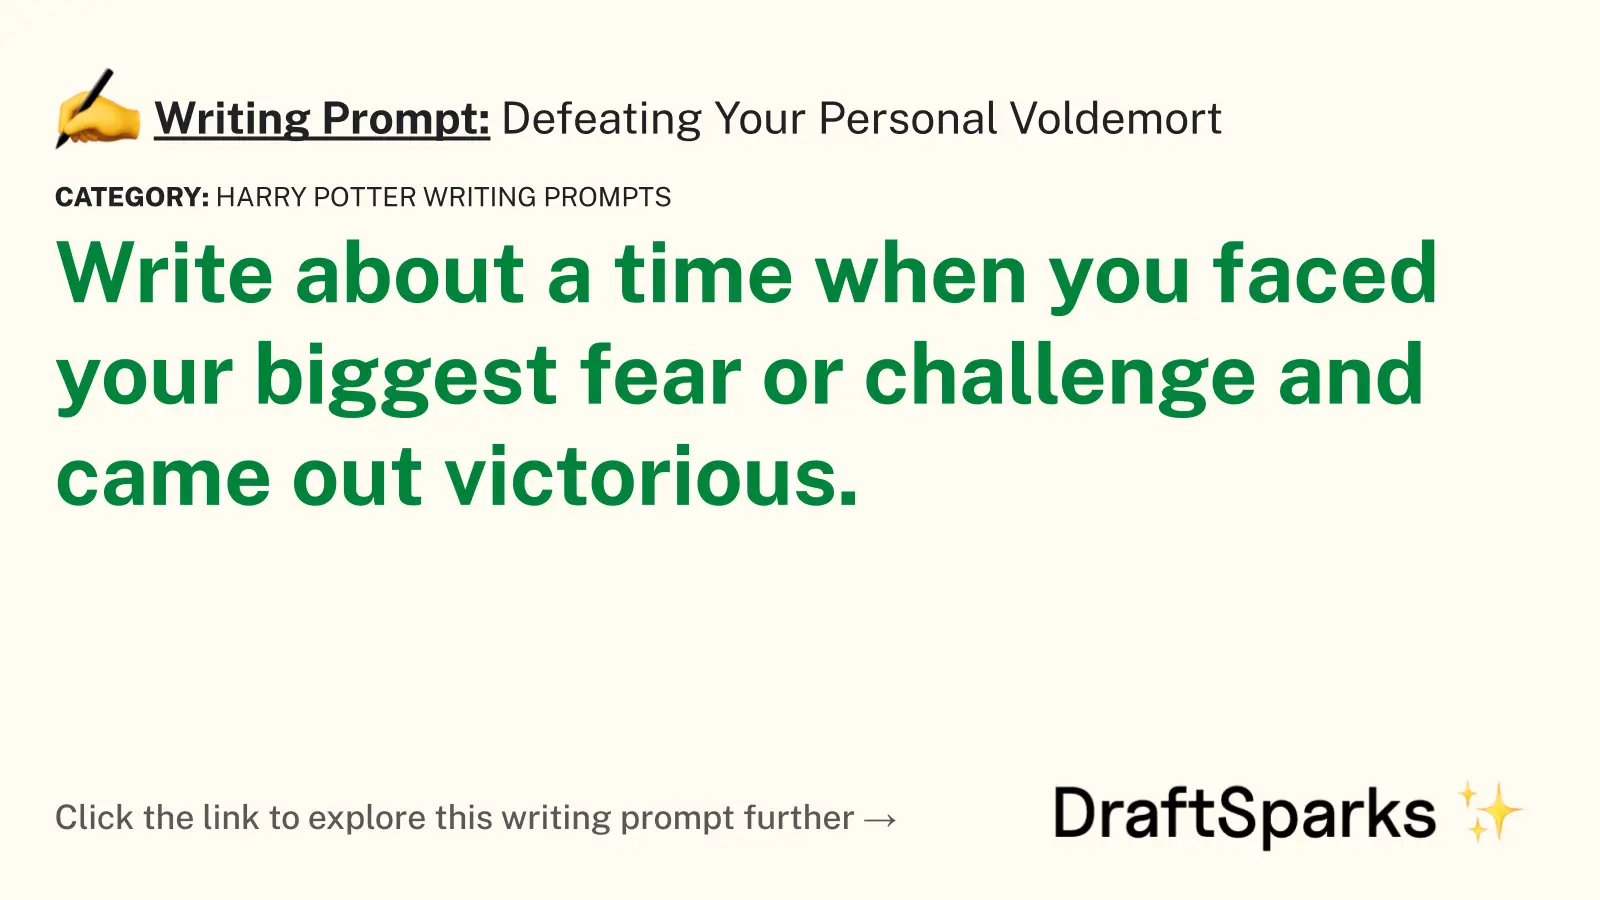 Defeating Your Personal Voldemort